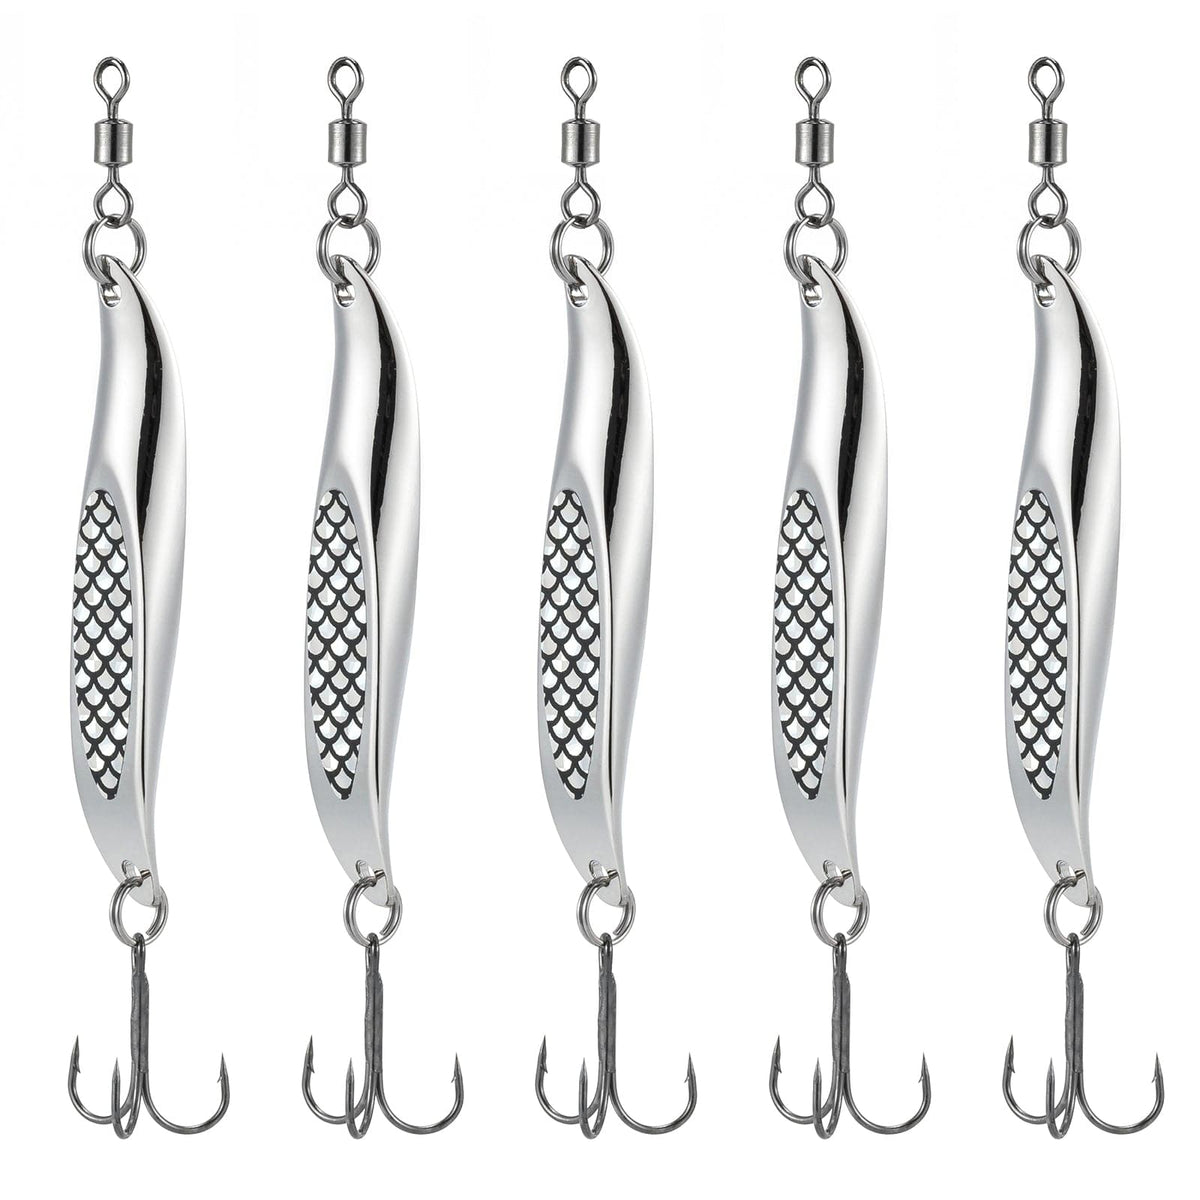 Dr.Fish 5pcs Wedge Lures Casting Spoons